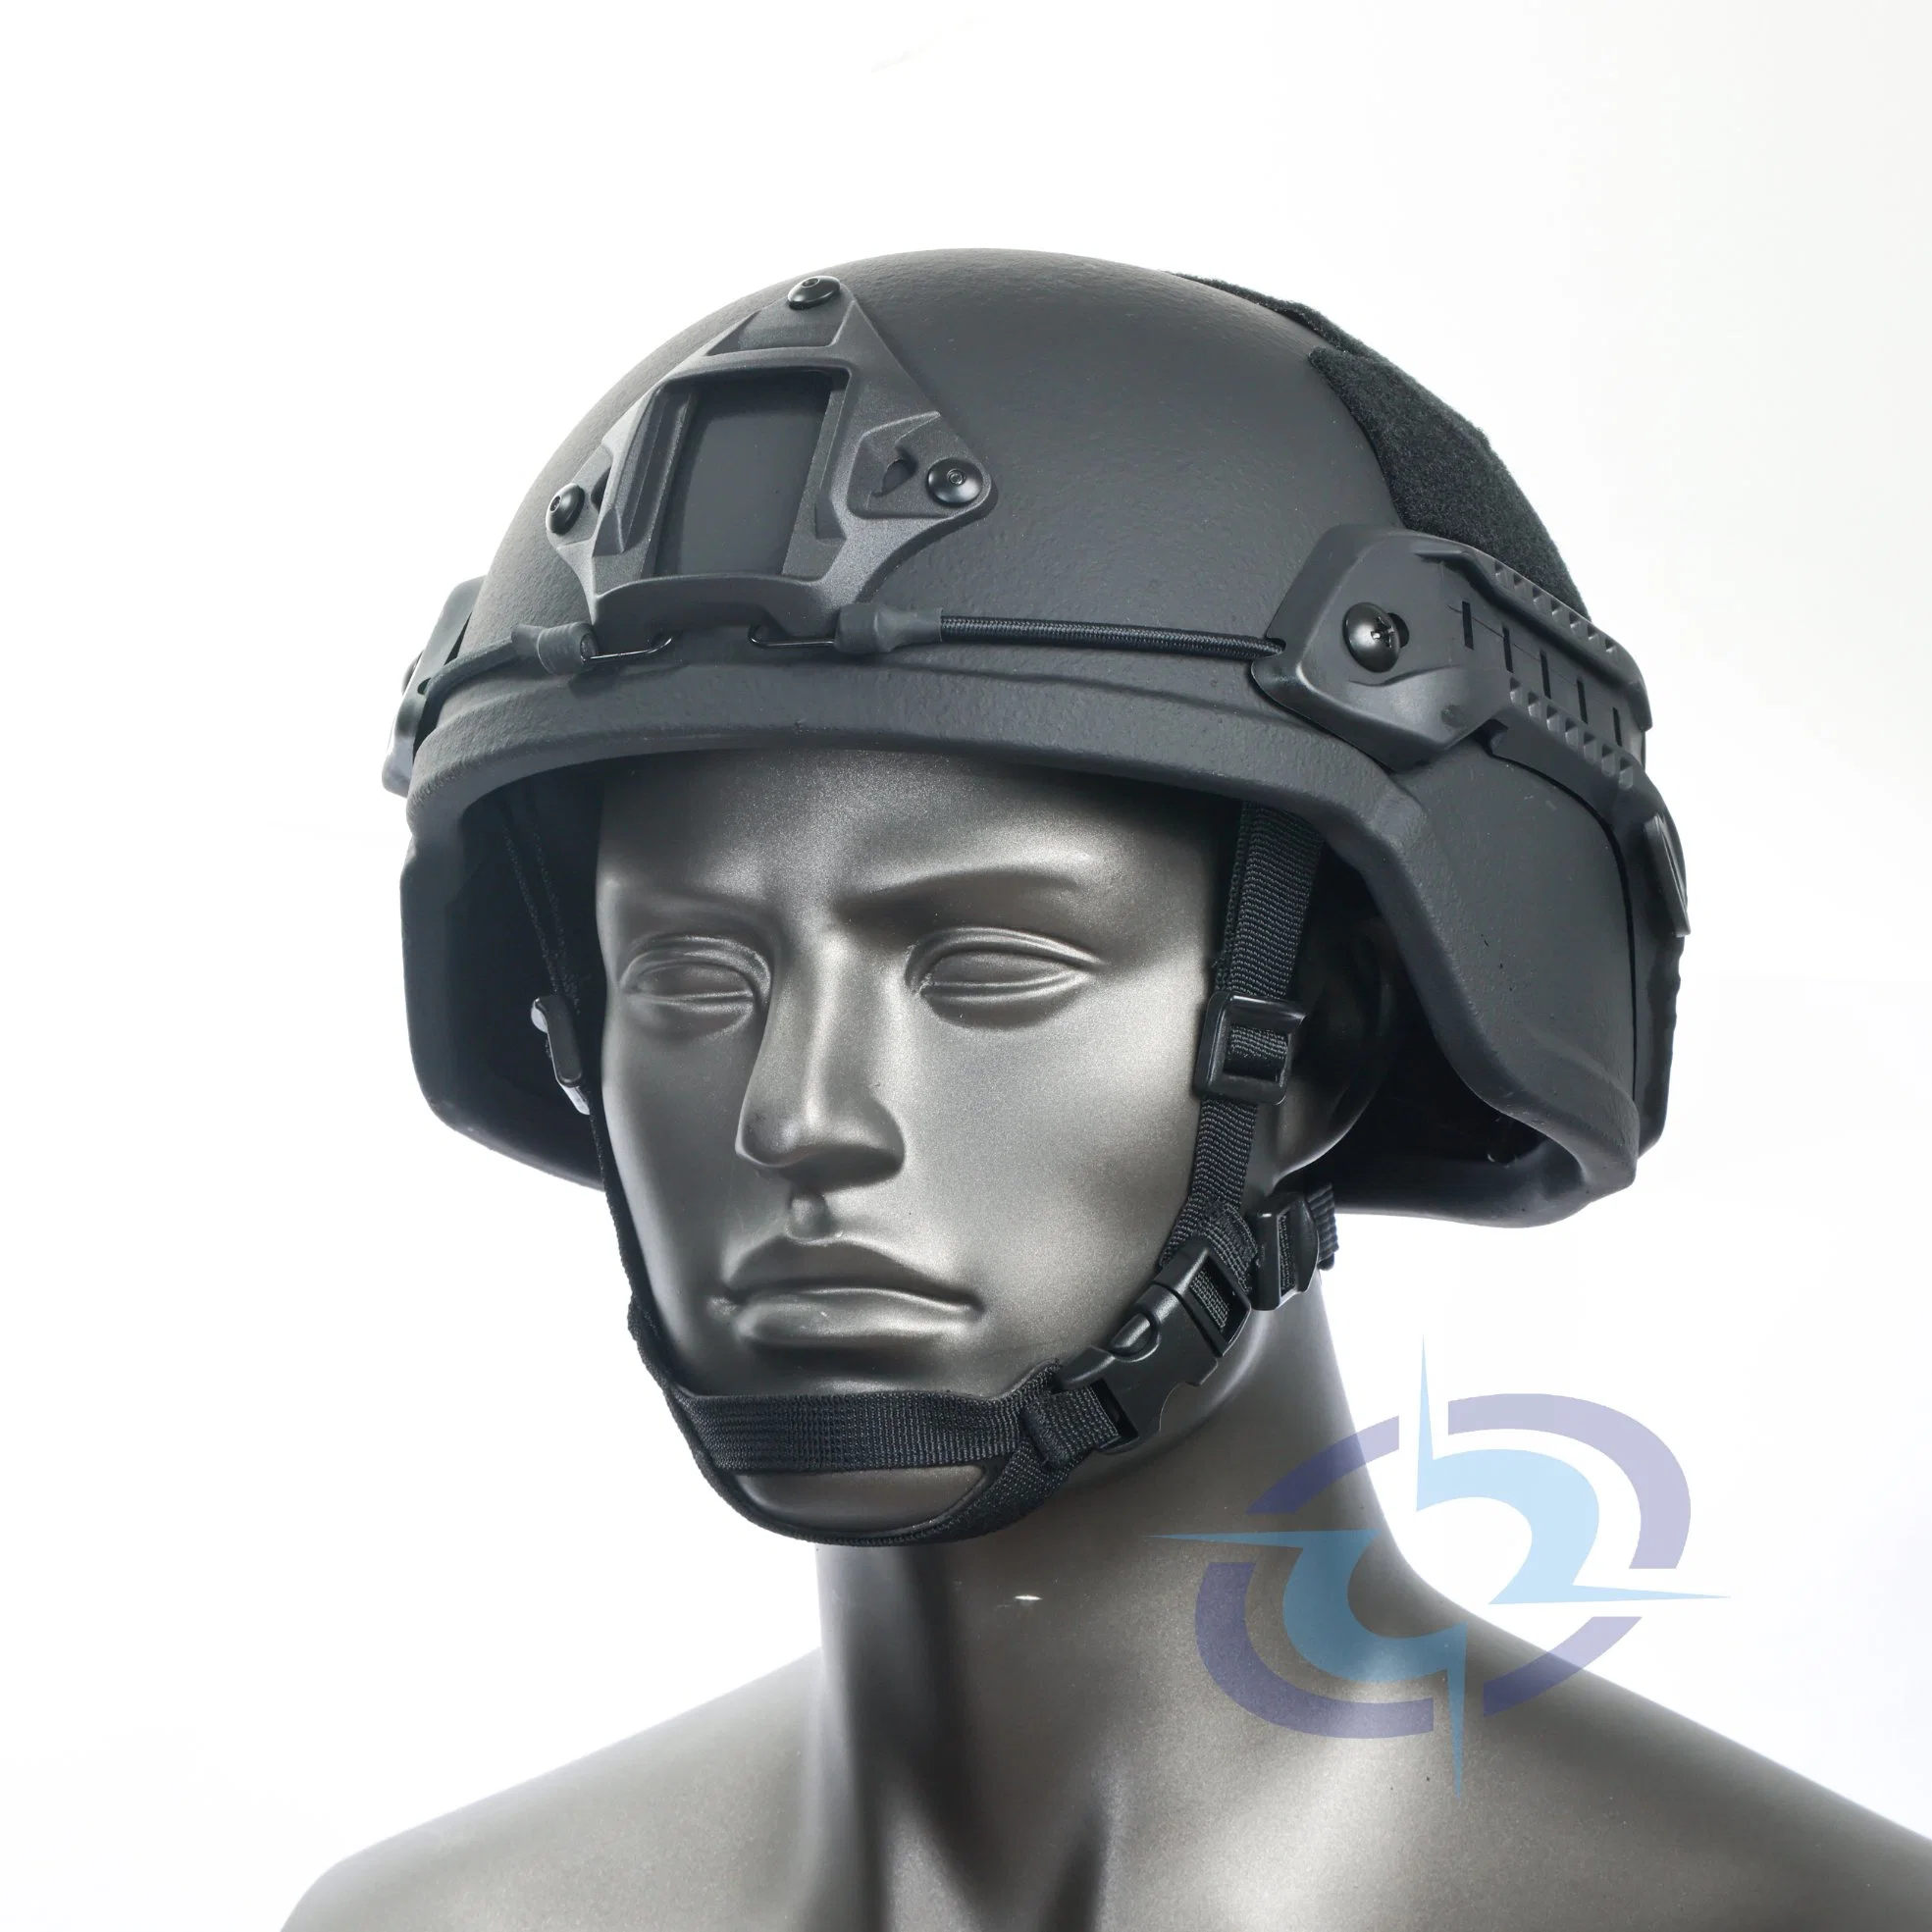 Pasgt Style Bullet Proof Combat Helmet with Nij III a Protection Level